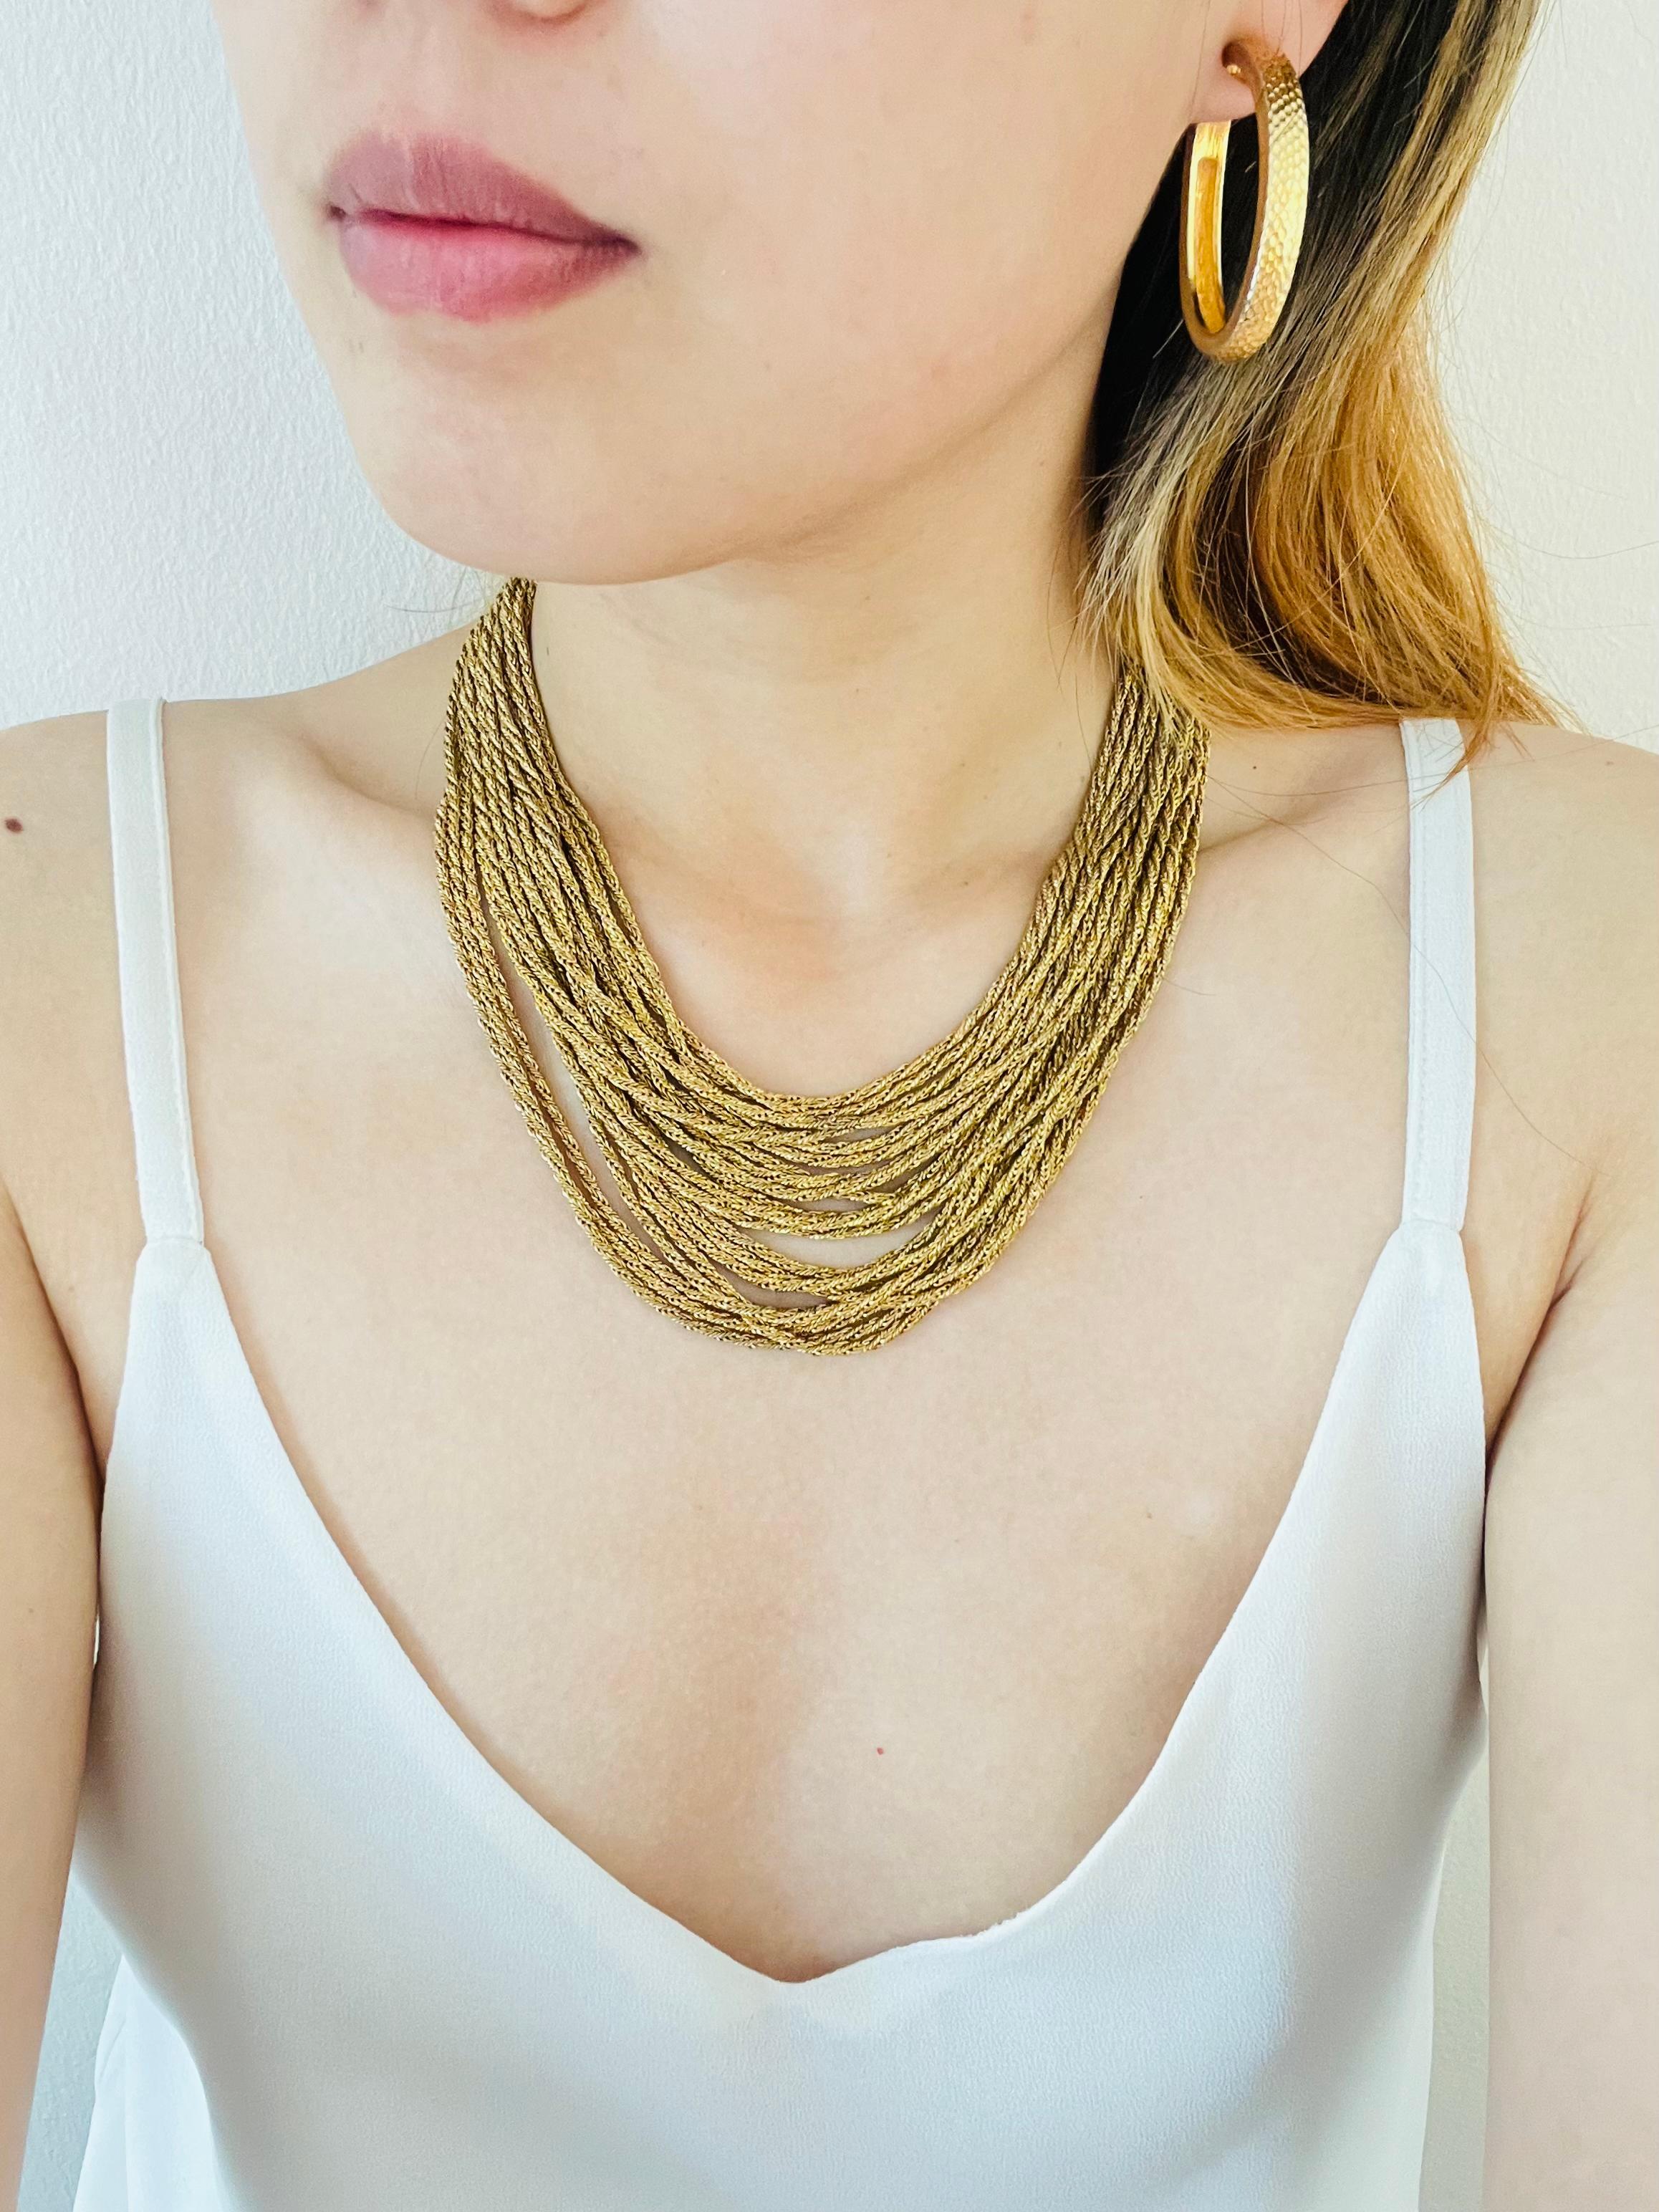 Christian Dior GROSSE 1968 Twenty 20 Strands Layers Chain Chunky Gold Necklace For Sale 5